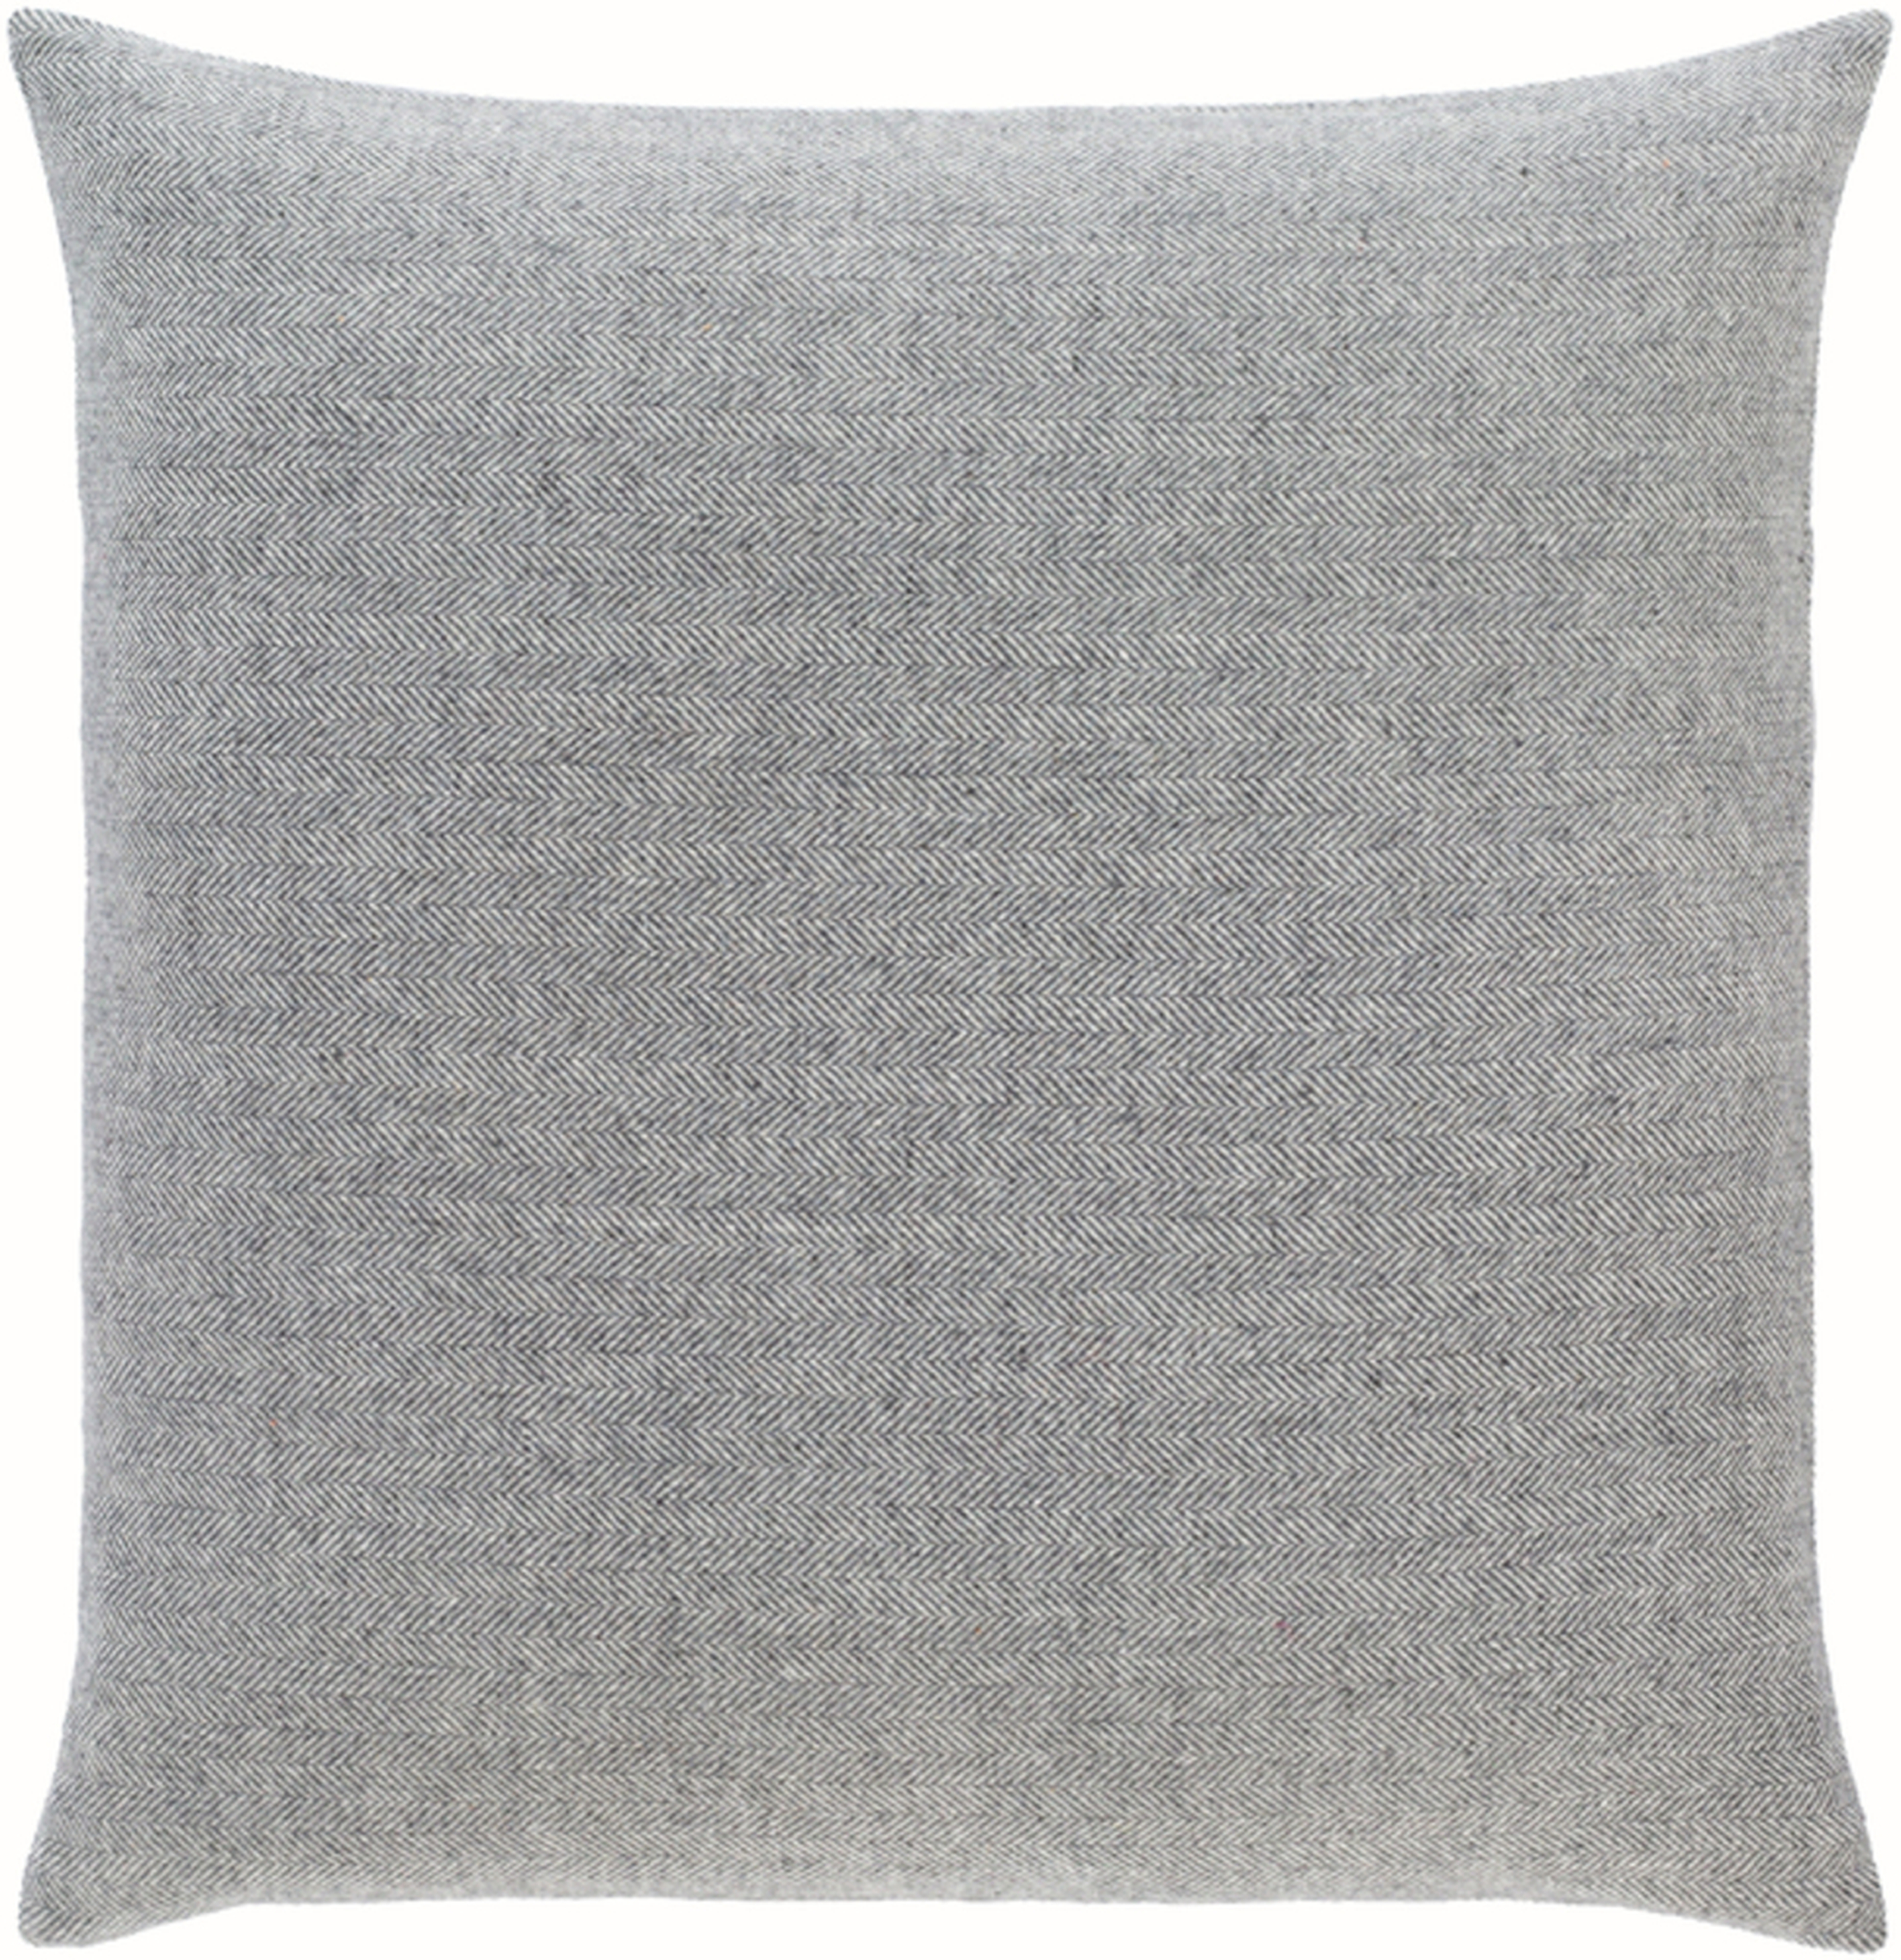 Wells Pillow Cover, 20" x 20", Charcoal - Cove Goods